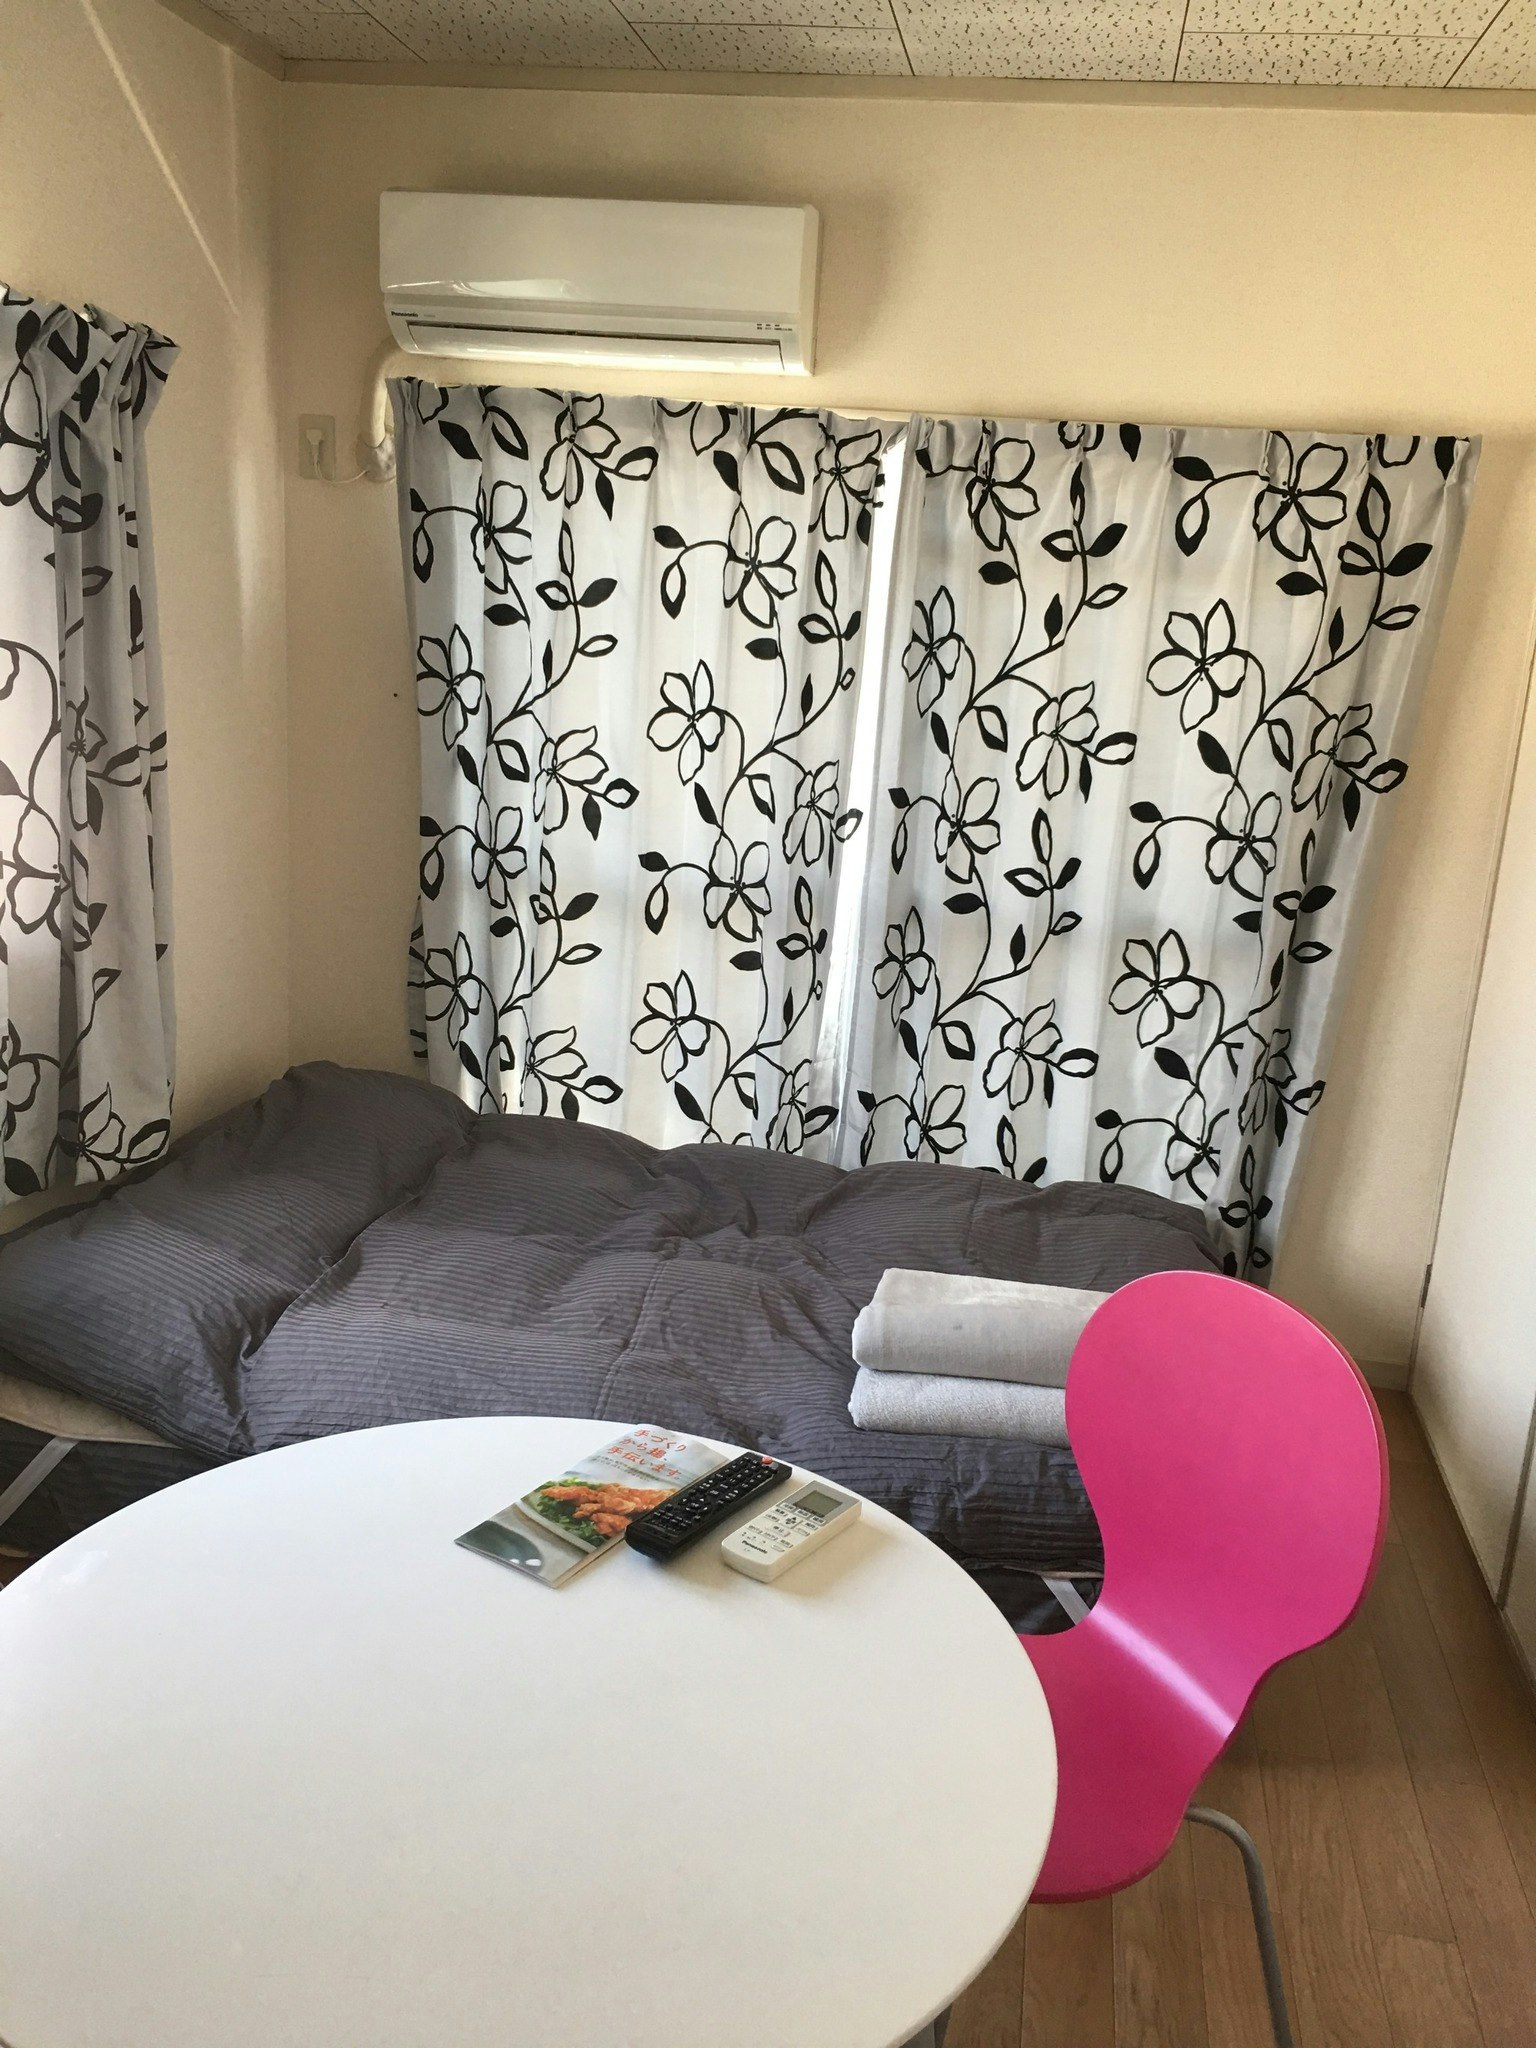 106 Cozy and Cleanliness Apartment